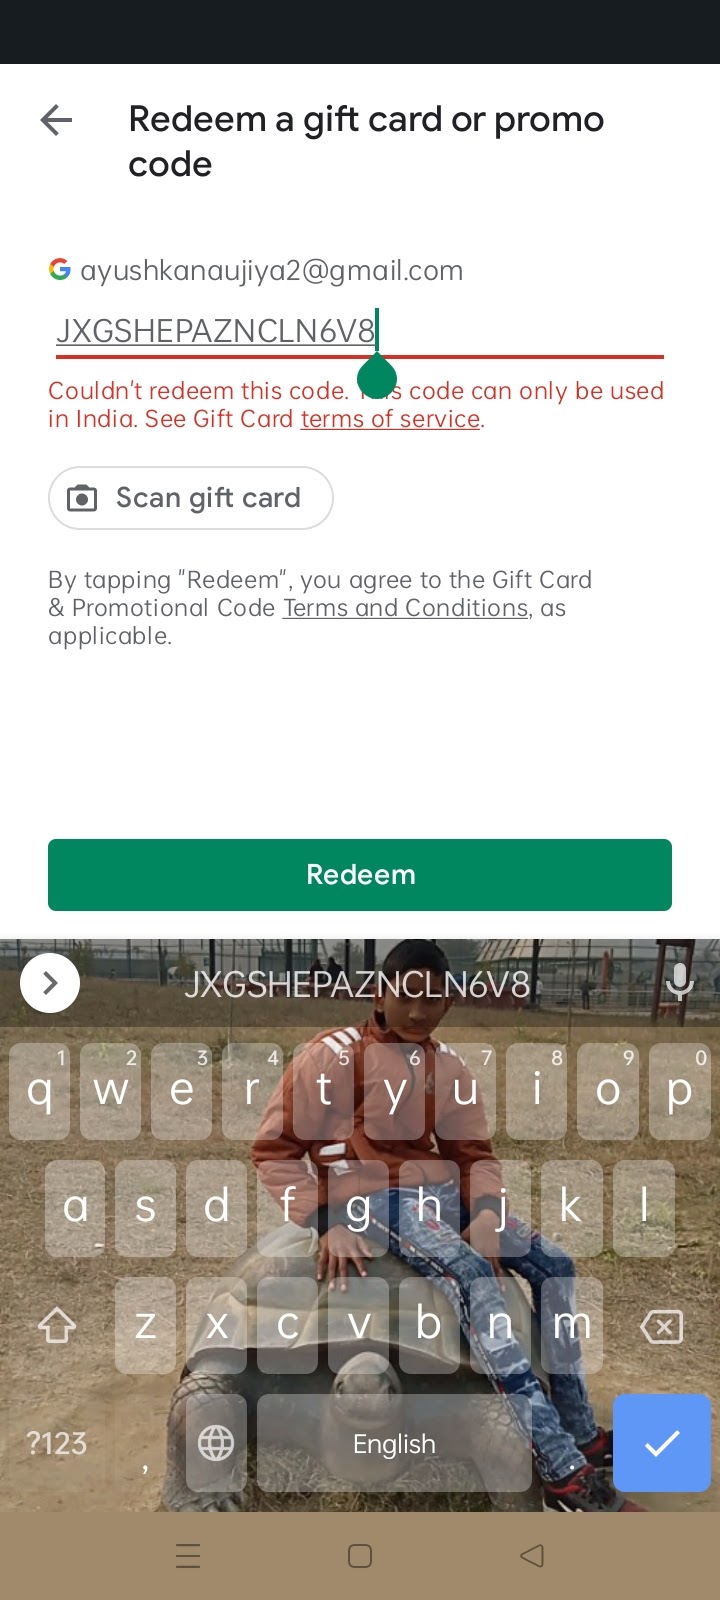 We need more info redeem code gift card - Comunidade Google Play